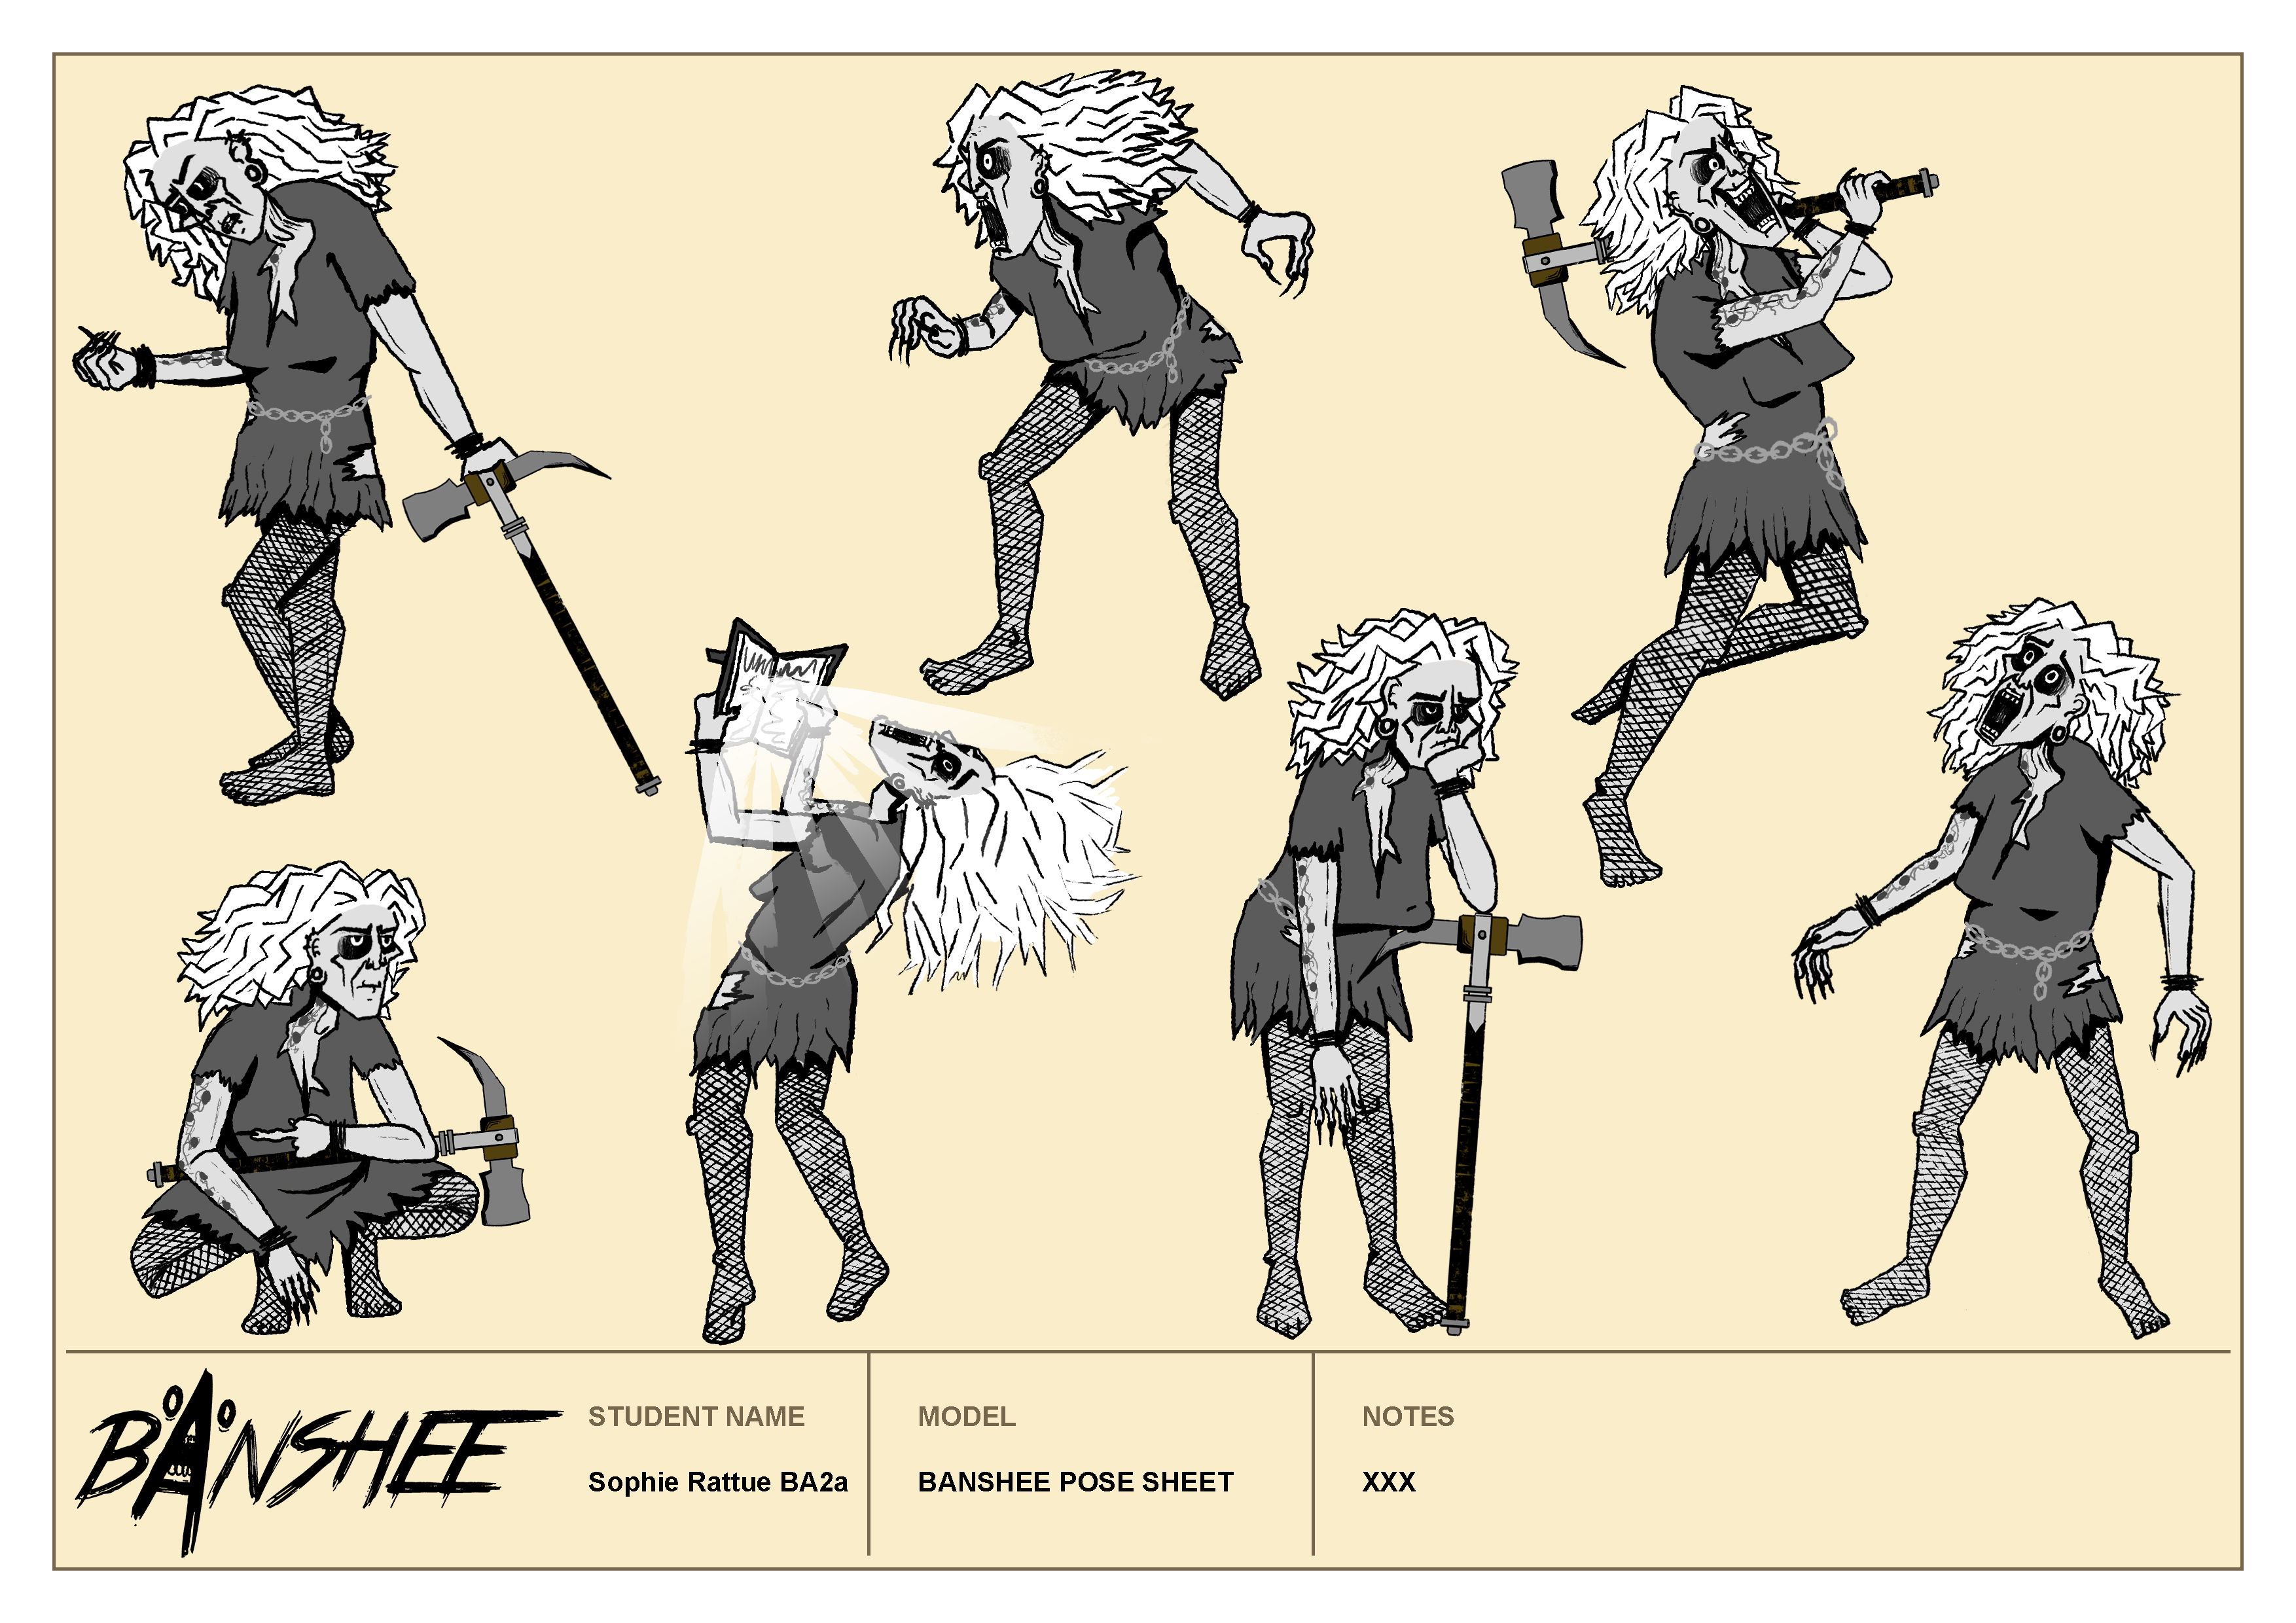 A series of poses depicting an older woman character with a large hammer, messy hair, fishnets, tattoos, and claw-like hands.